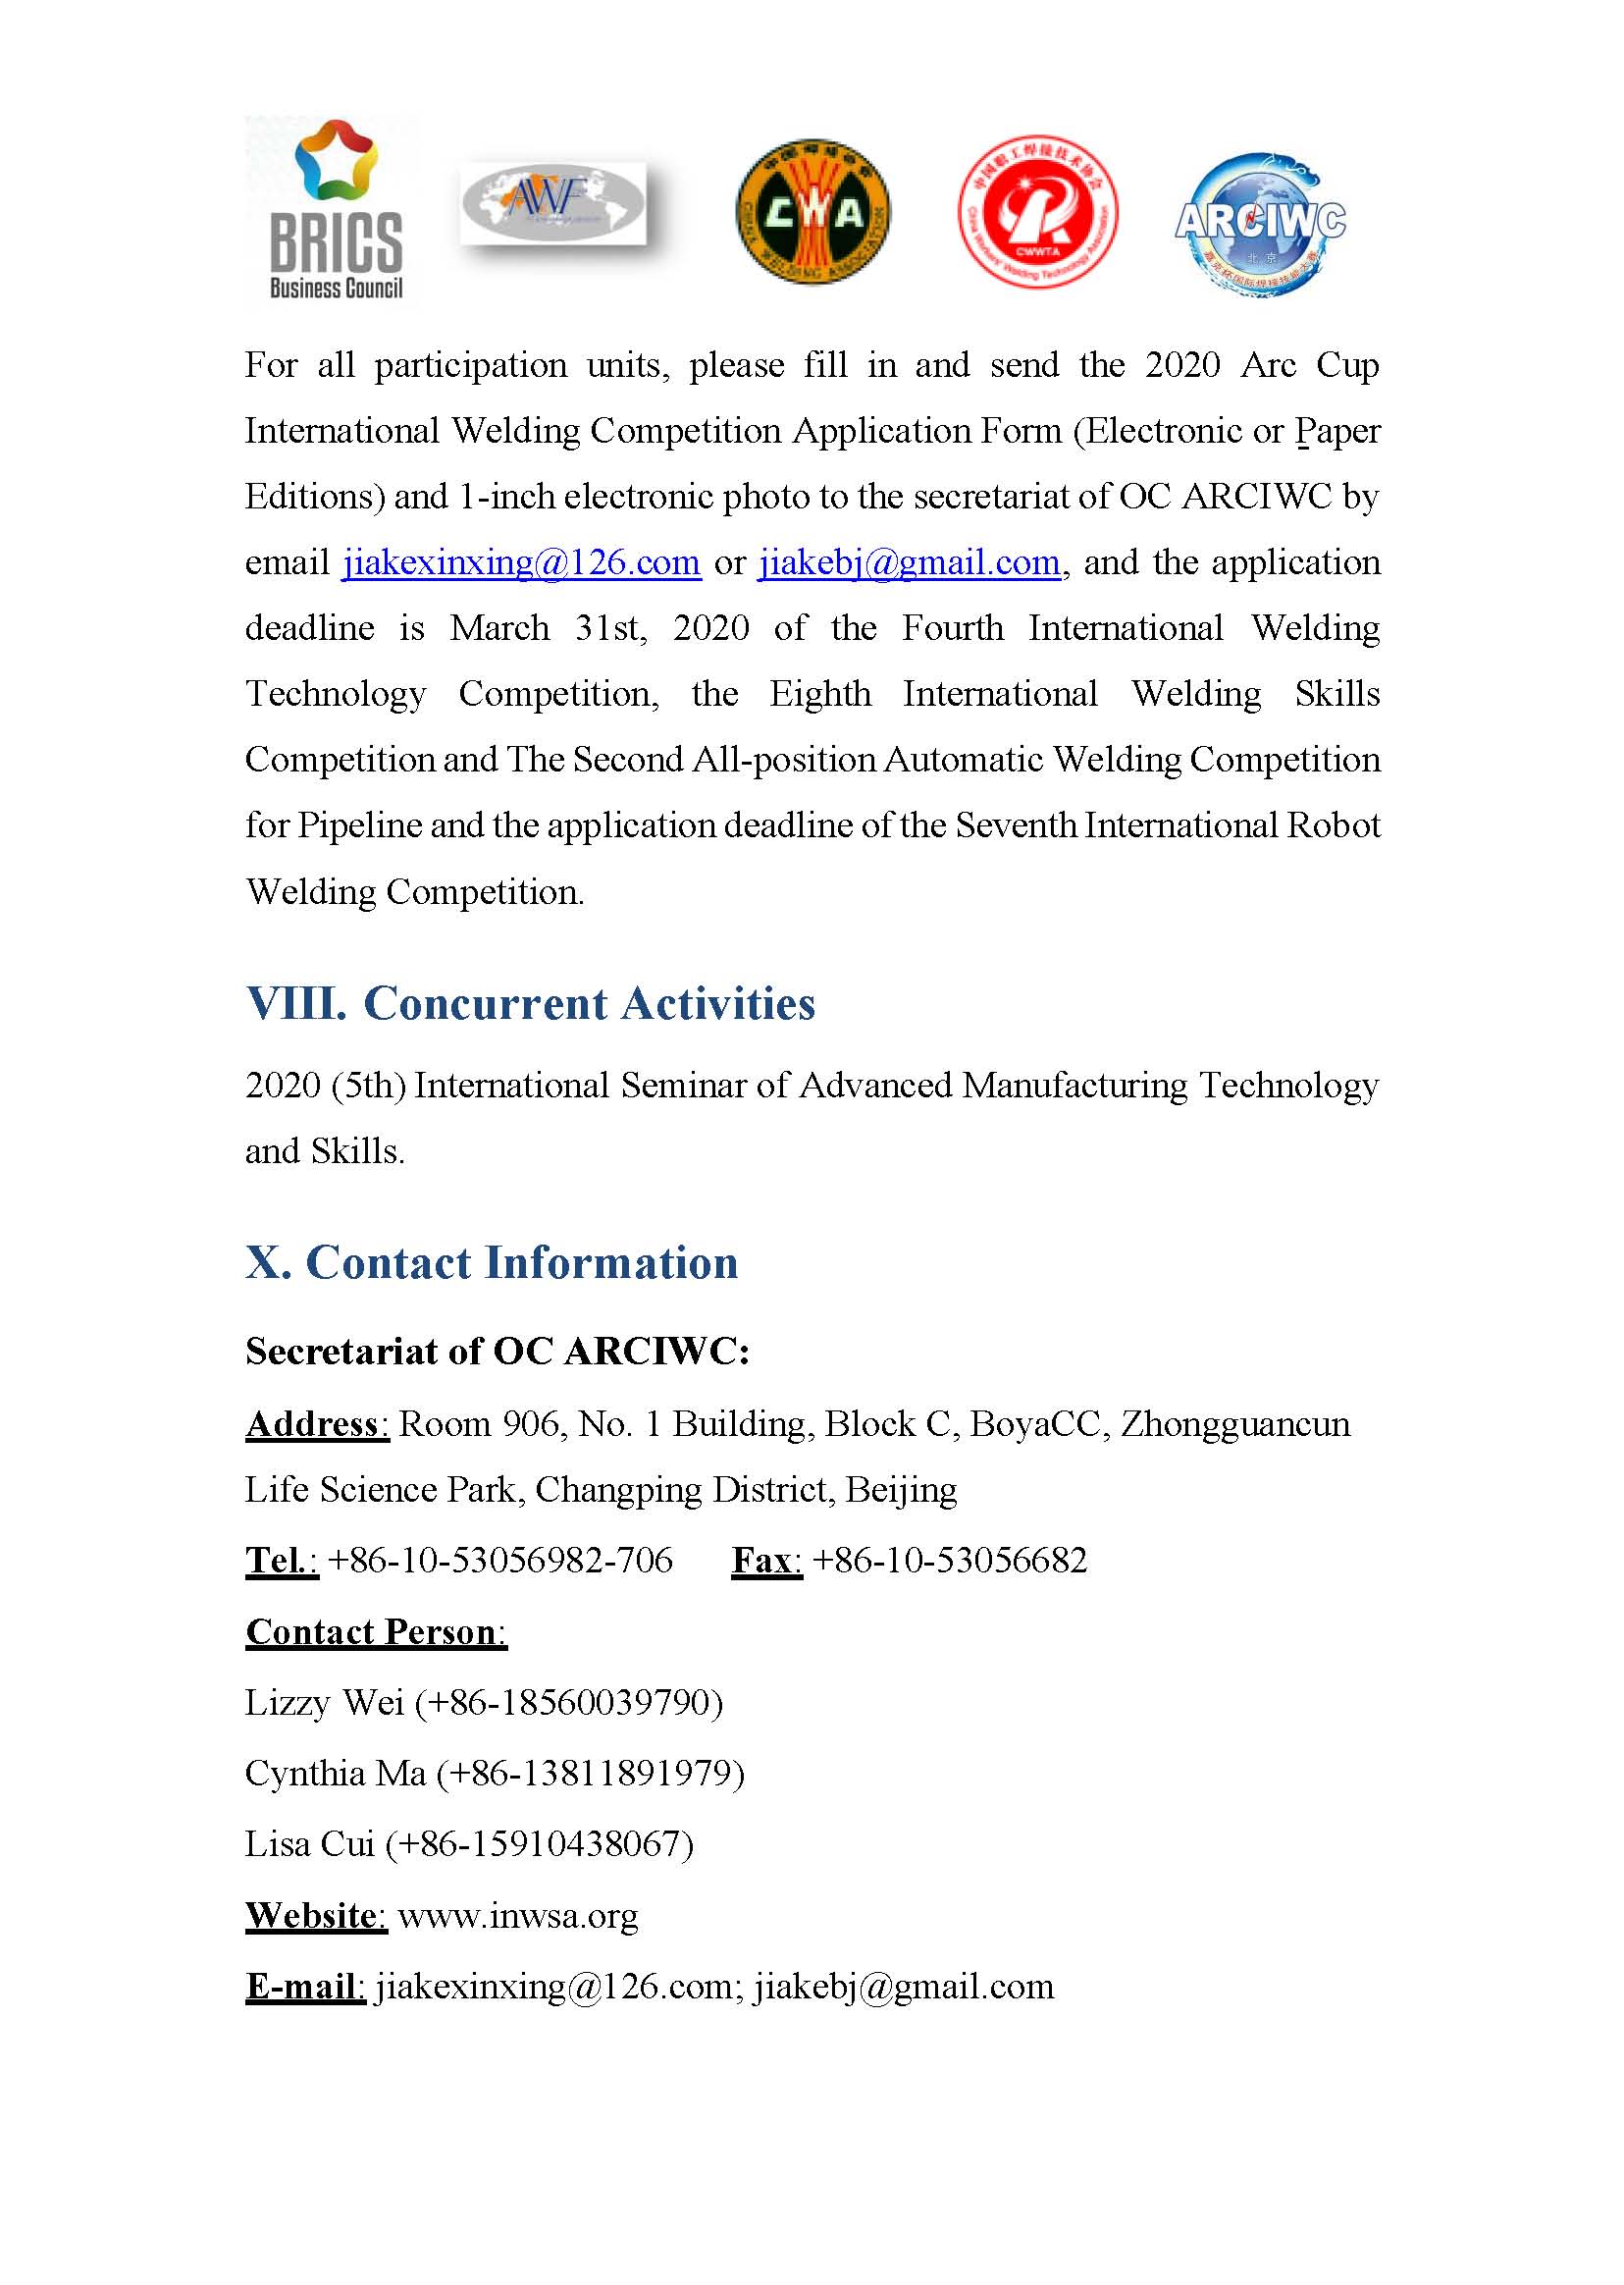 2020 Arc Cup International Welding Competition Invitation 8